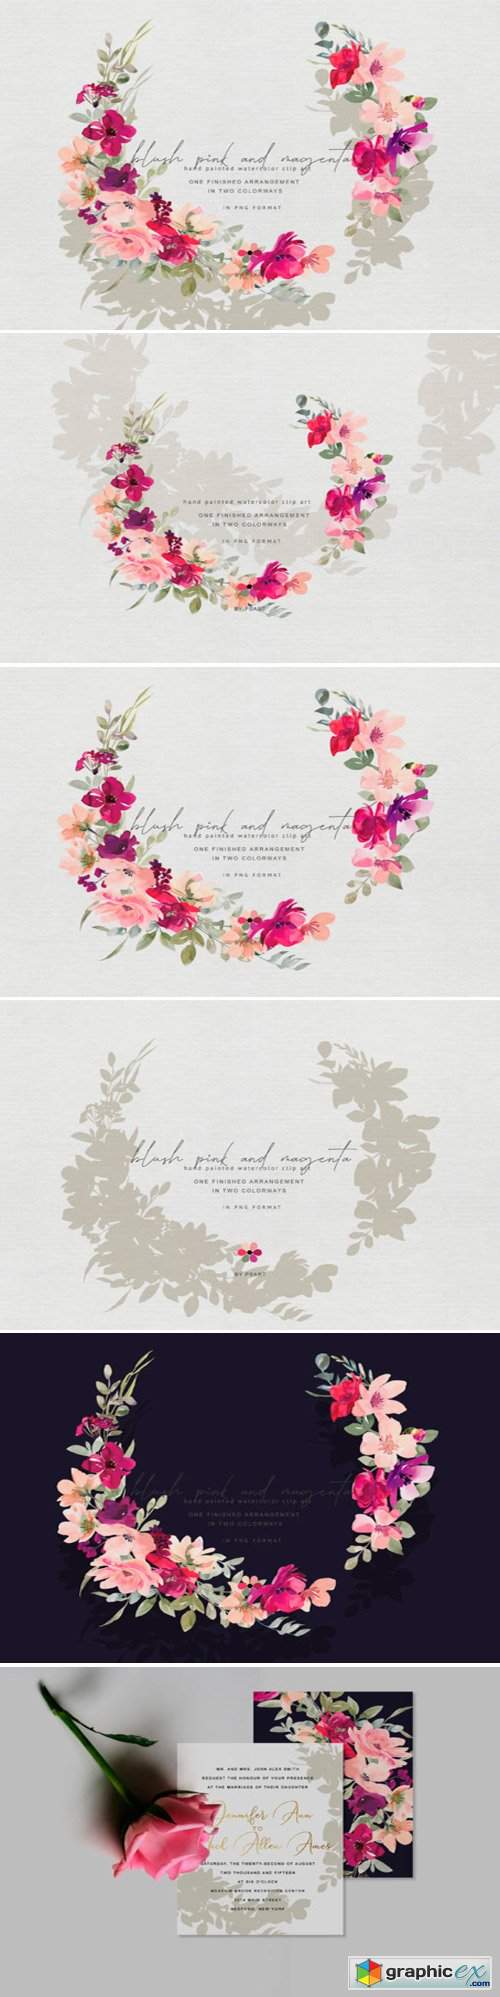 Hand Painted Watercolor Floral Wreath